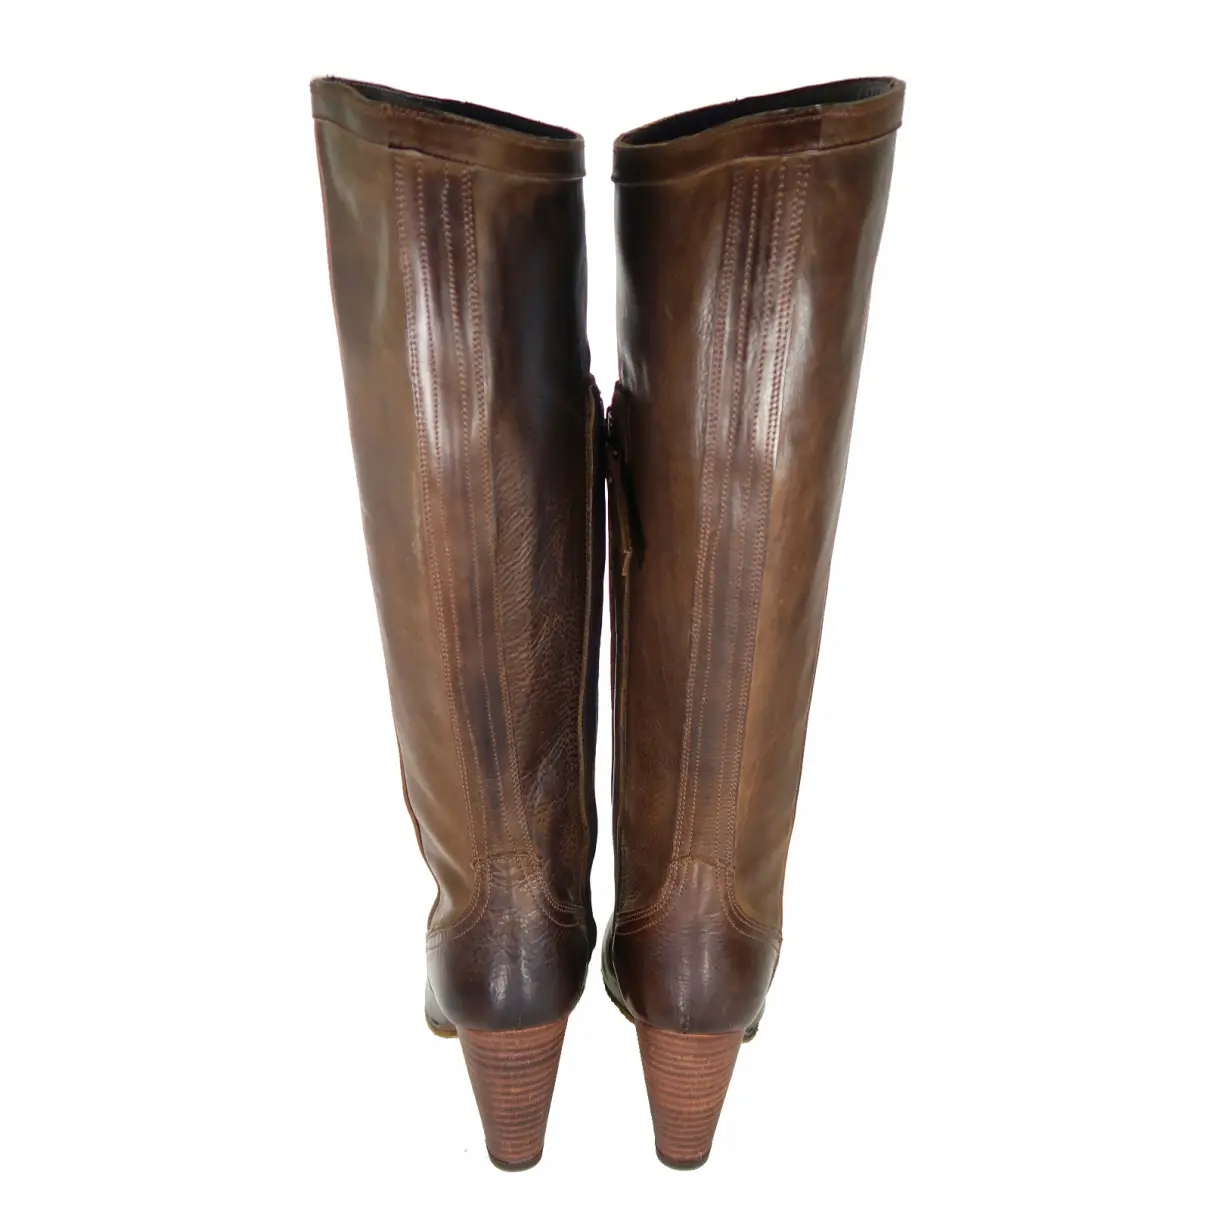 Luxury N.D.C. Made by Hand Boots Women